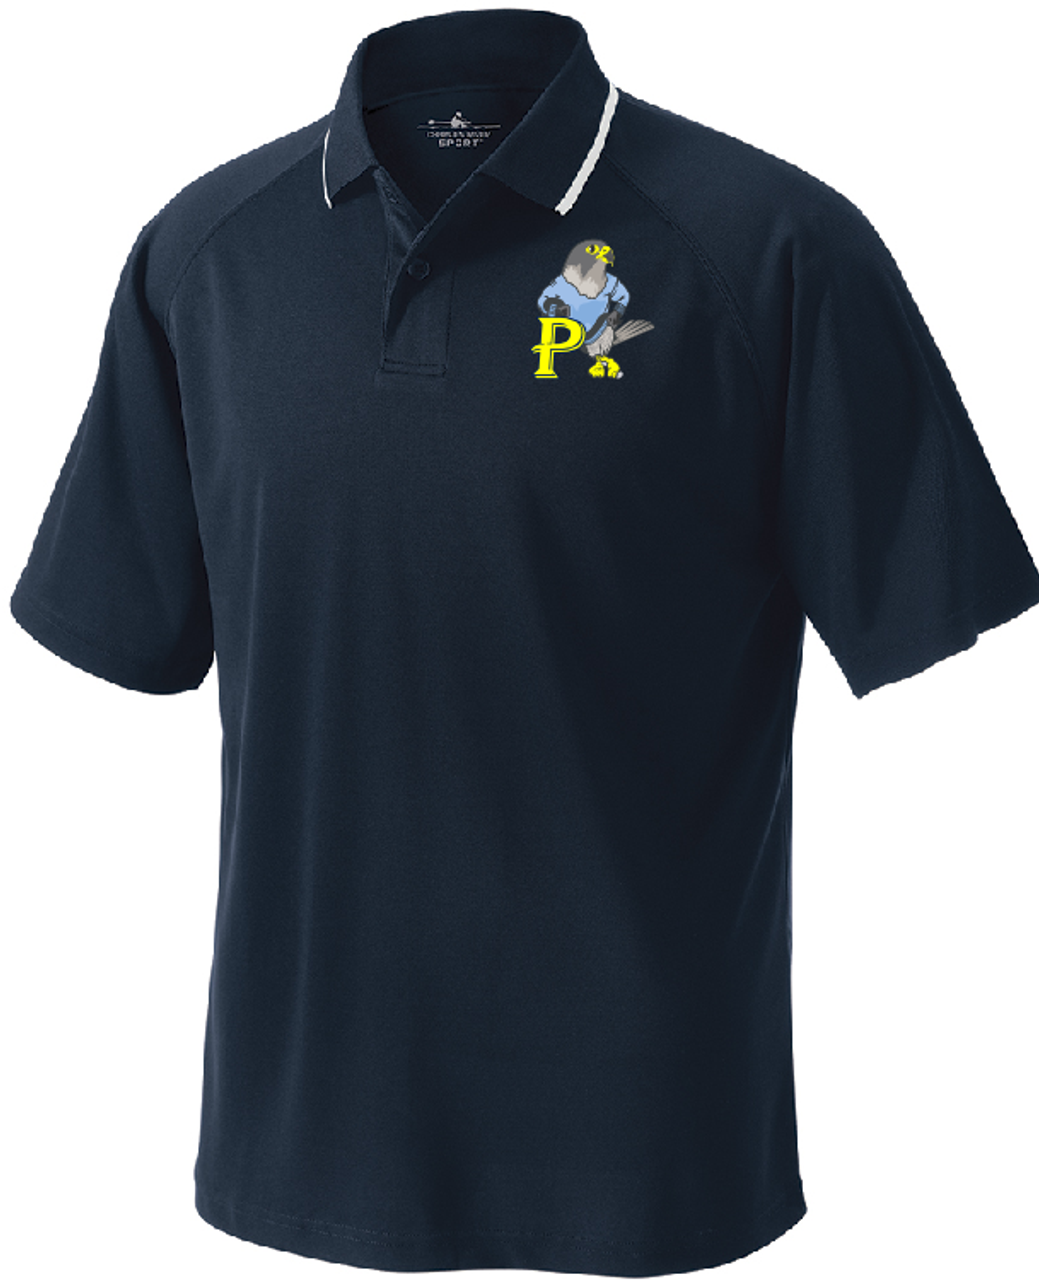 Perryville MS Performance Polo, Navy/White